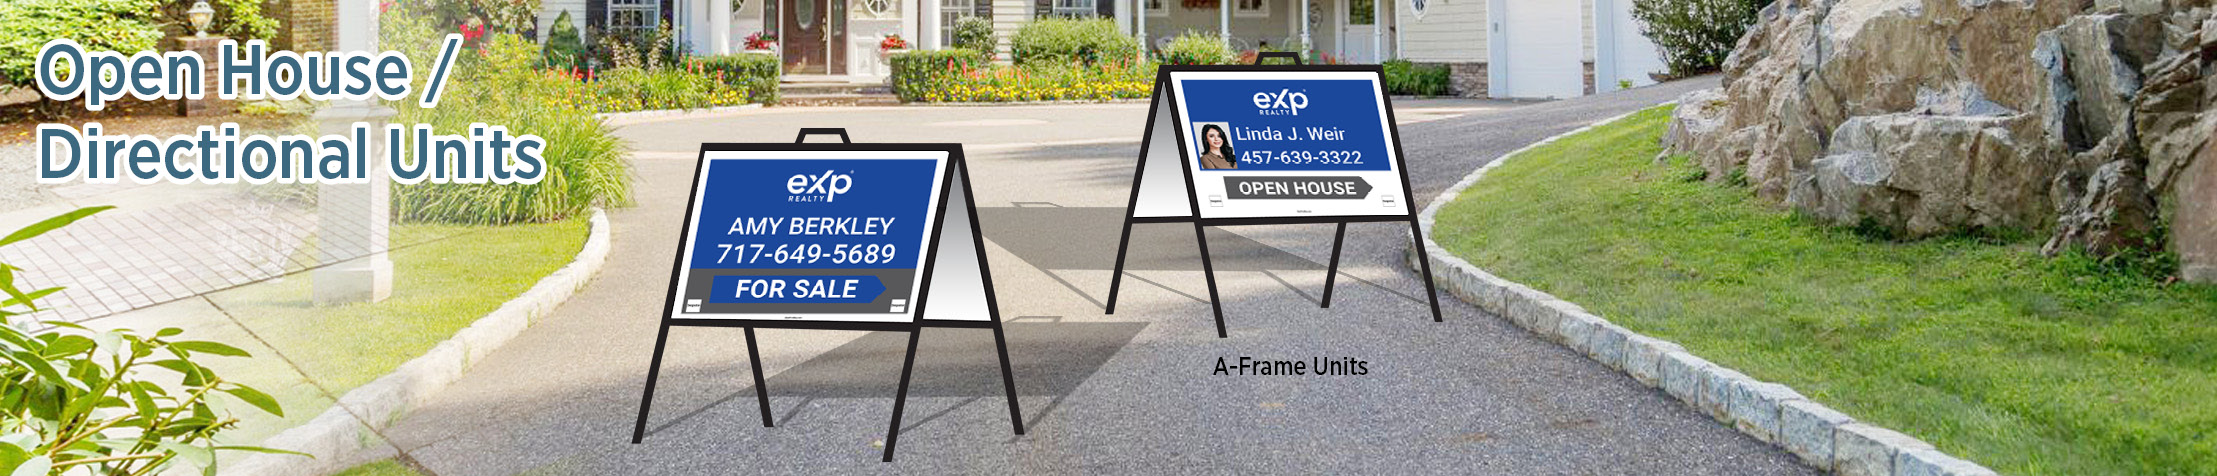 eXp Realty Real Estate Open House/Directional Units - eXp Realty  directional real estate signs | BestPrintBuy.com